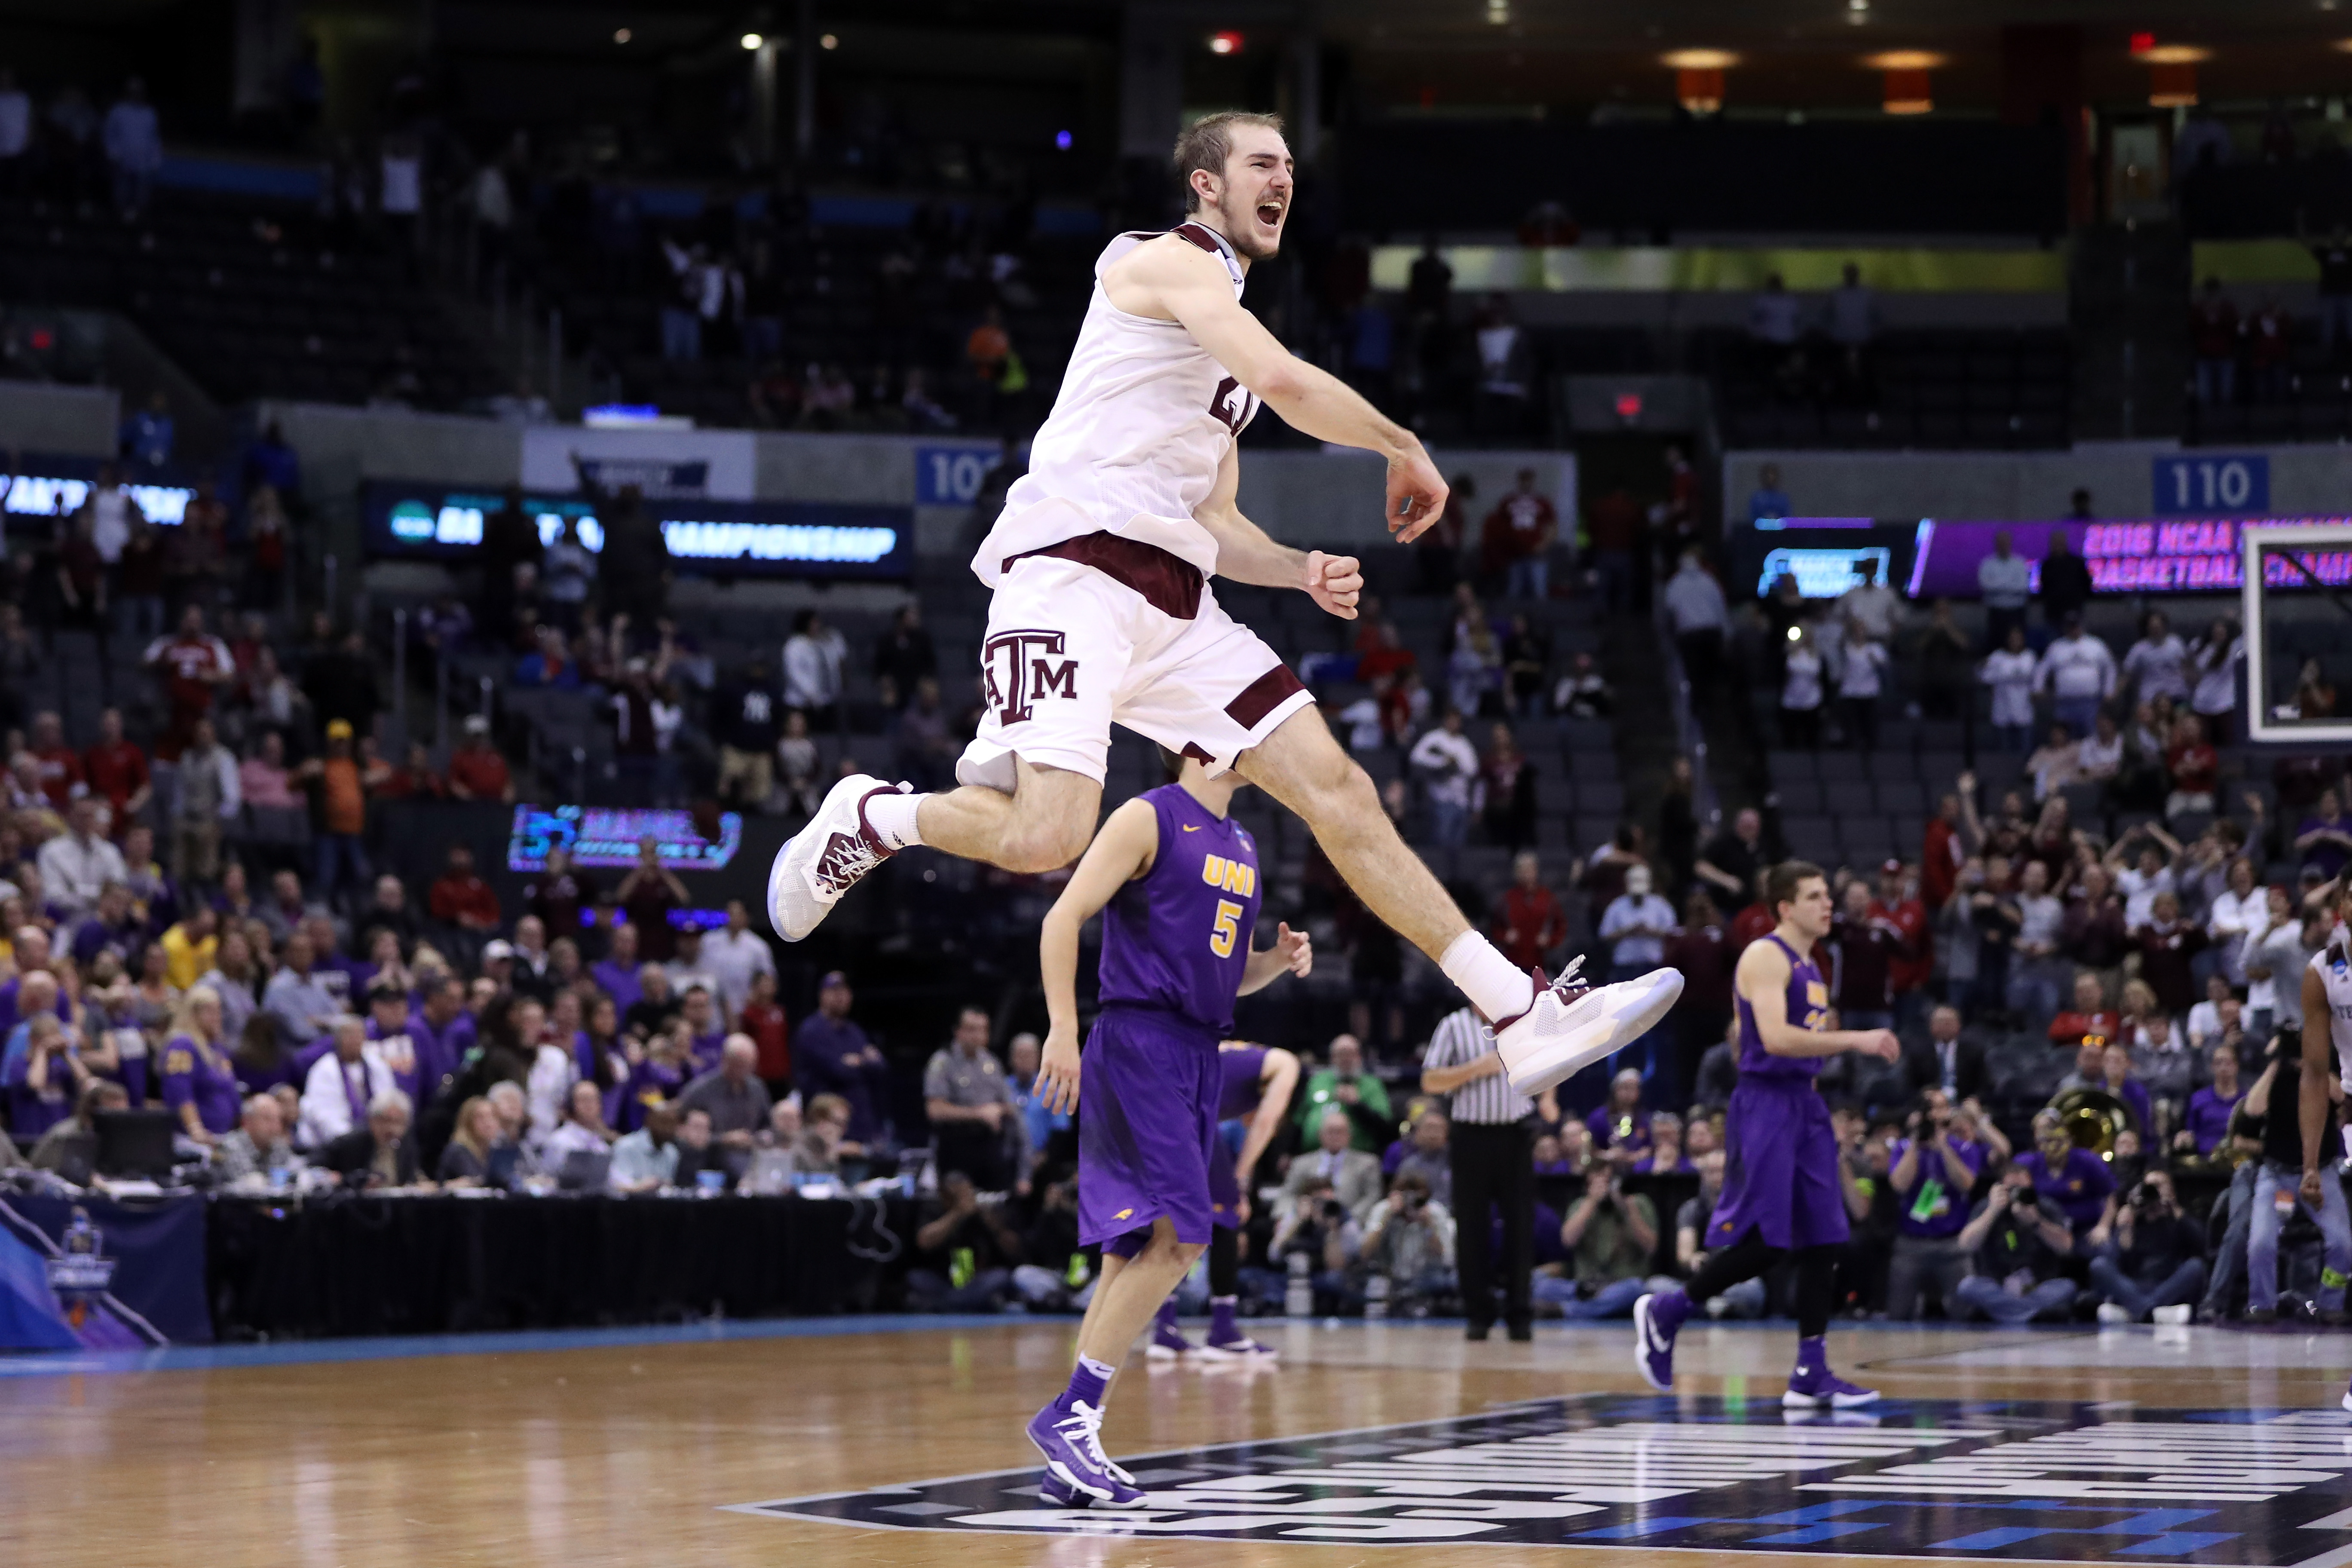 OKLAHOMA CITY, OK - MARCH 20: Alex Caruso #21 of the Texas A&M Aggies celebrates after defeating the Northern Iowa Panthers in double overtime with a score of 88 to 92 during the second round of the 2016 NCAA Men's Basketball Tournament at Chesapeake Energy Arena on March 20, 2016 in Oklahoma City, Oklahoma. (Photo by Ronald Martinez/Getty Images)